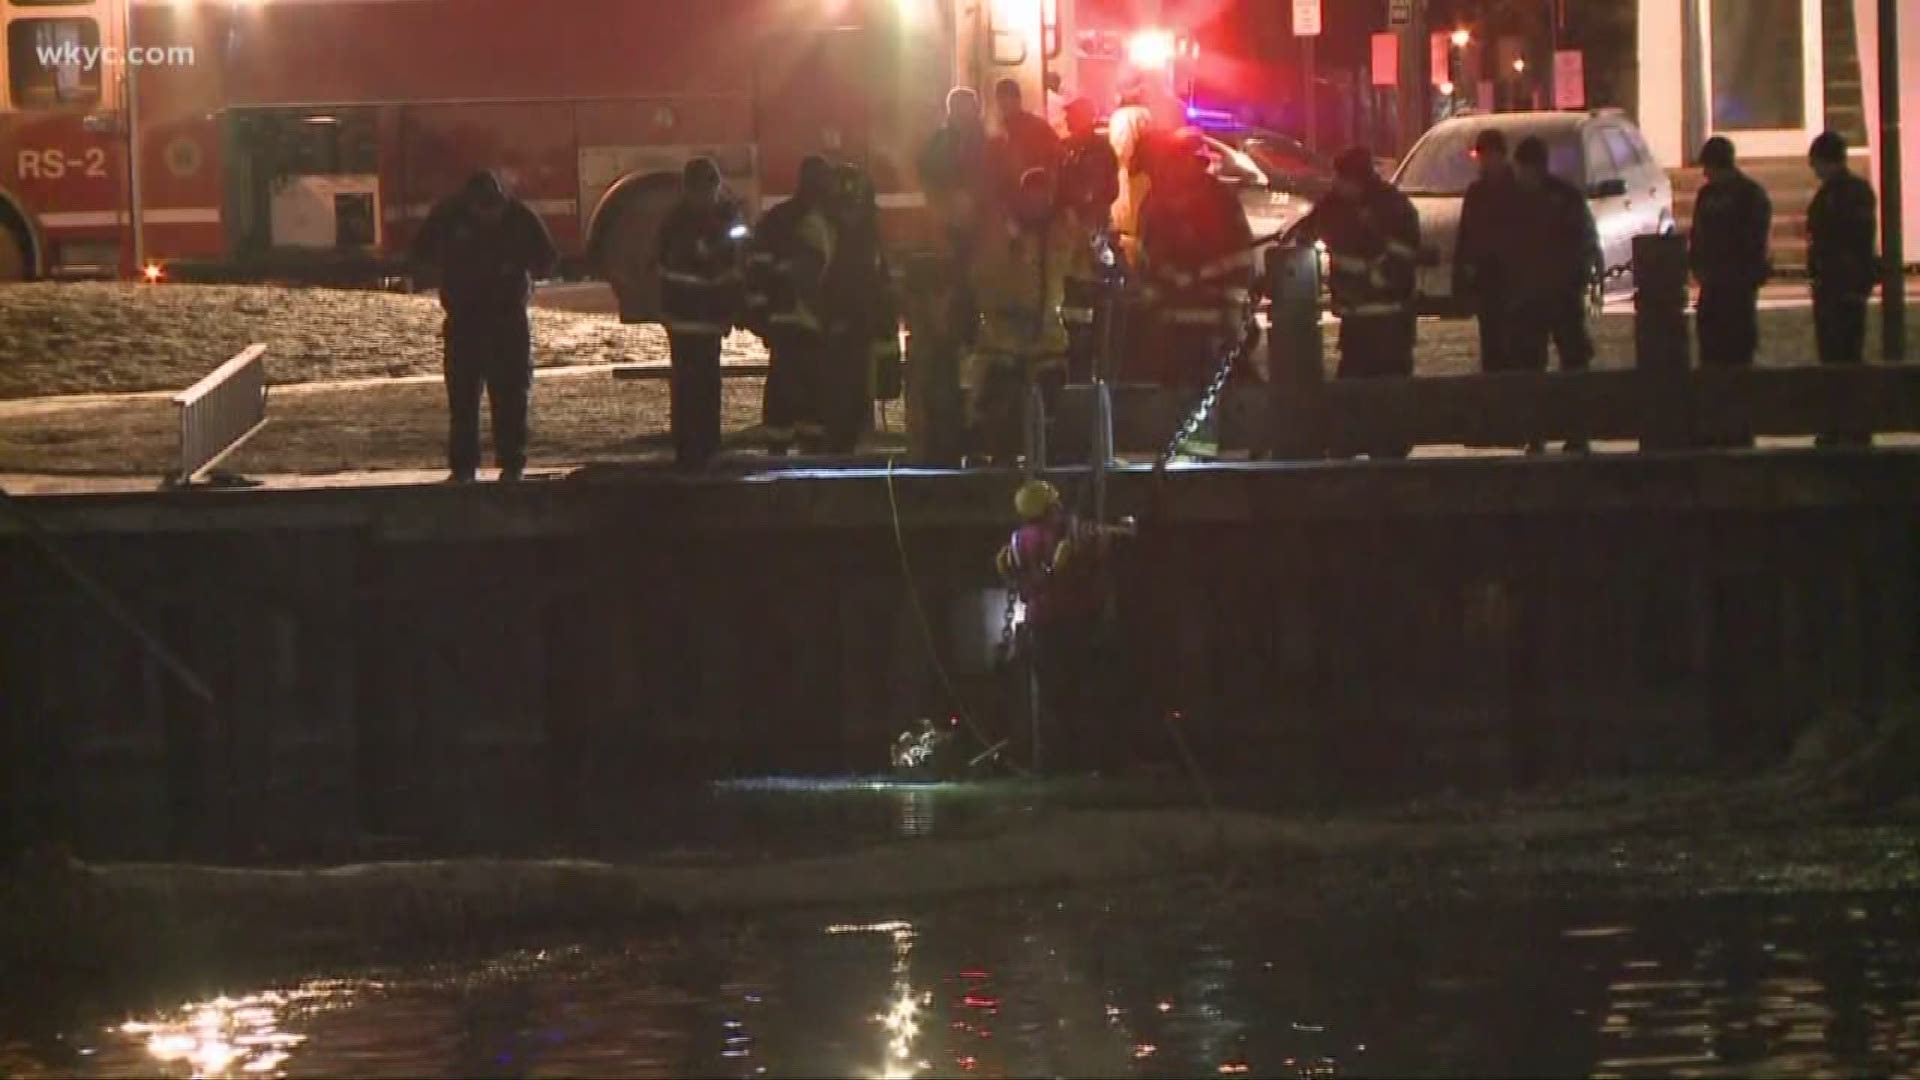 March 4, 2019: A rescue mission was underway early Monday morning after a car drove into the Cuyahoga River. Firefighters and first responders were in the frigid waters trying to get to the vehicle. Police say the car was going down Elm Avenue near the Stonebridge Apartments in the Flats when the driver crossed Riverbed Street, drove through the grassy area and then down into the river.